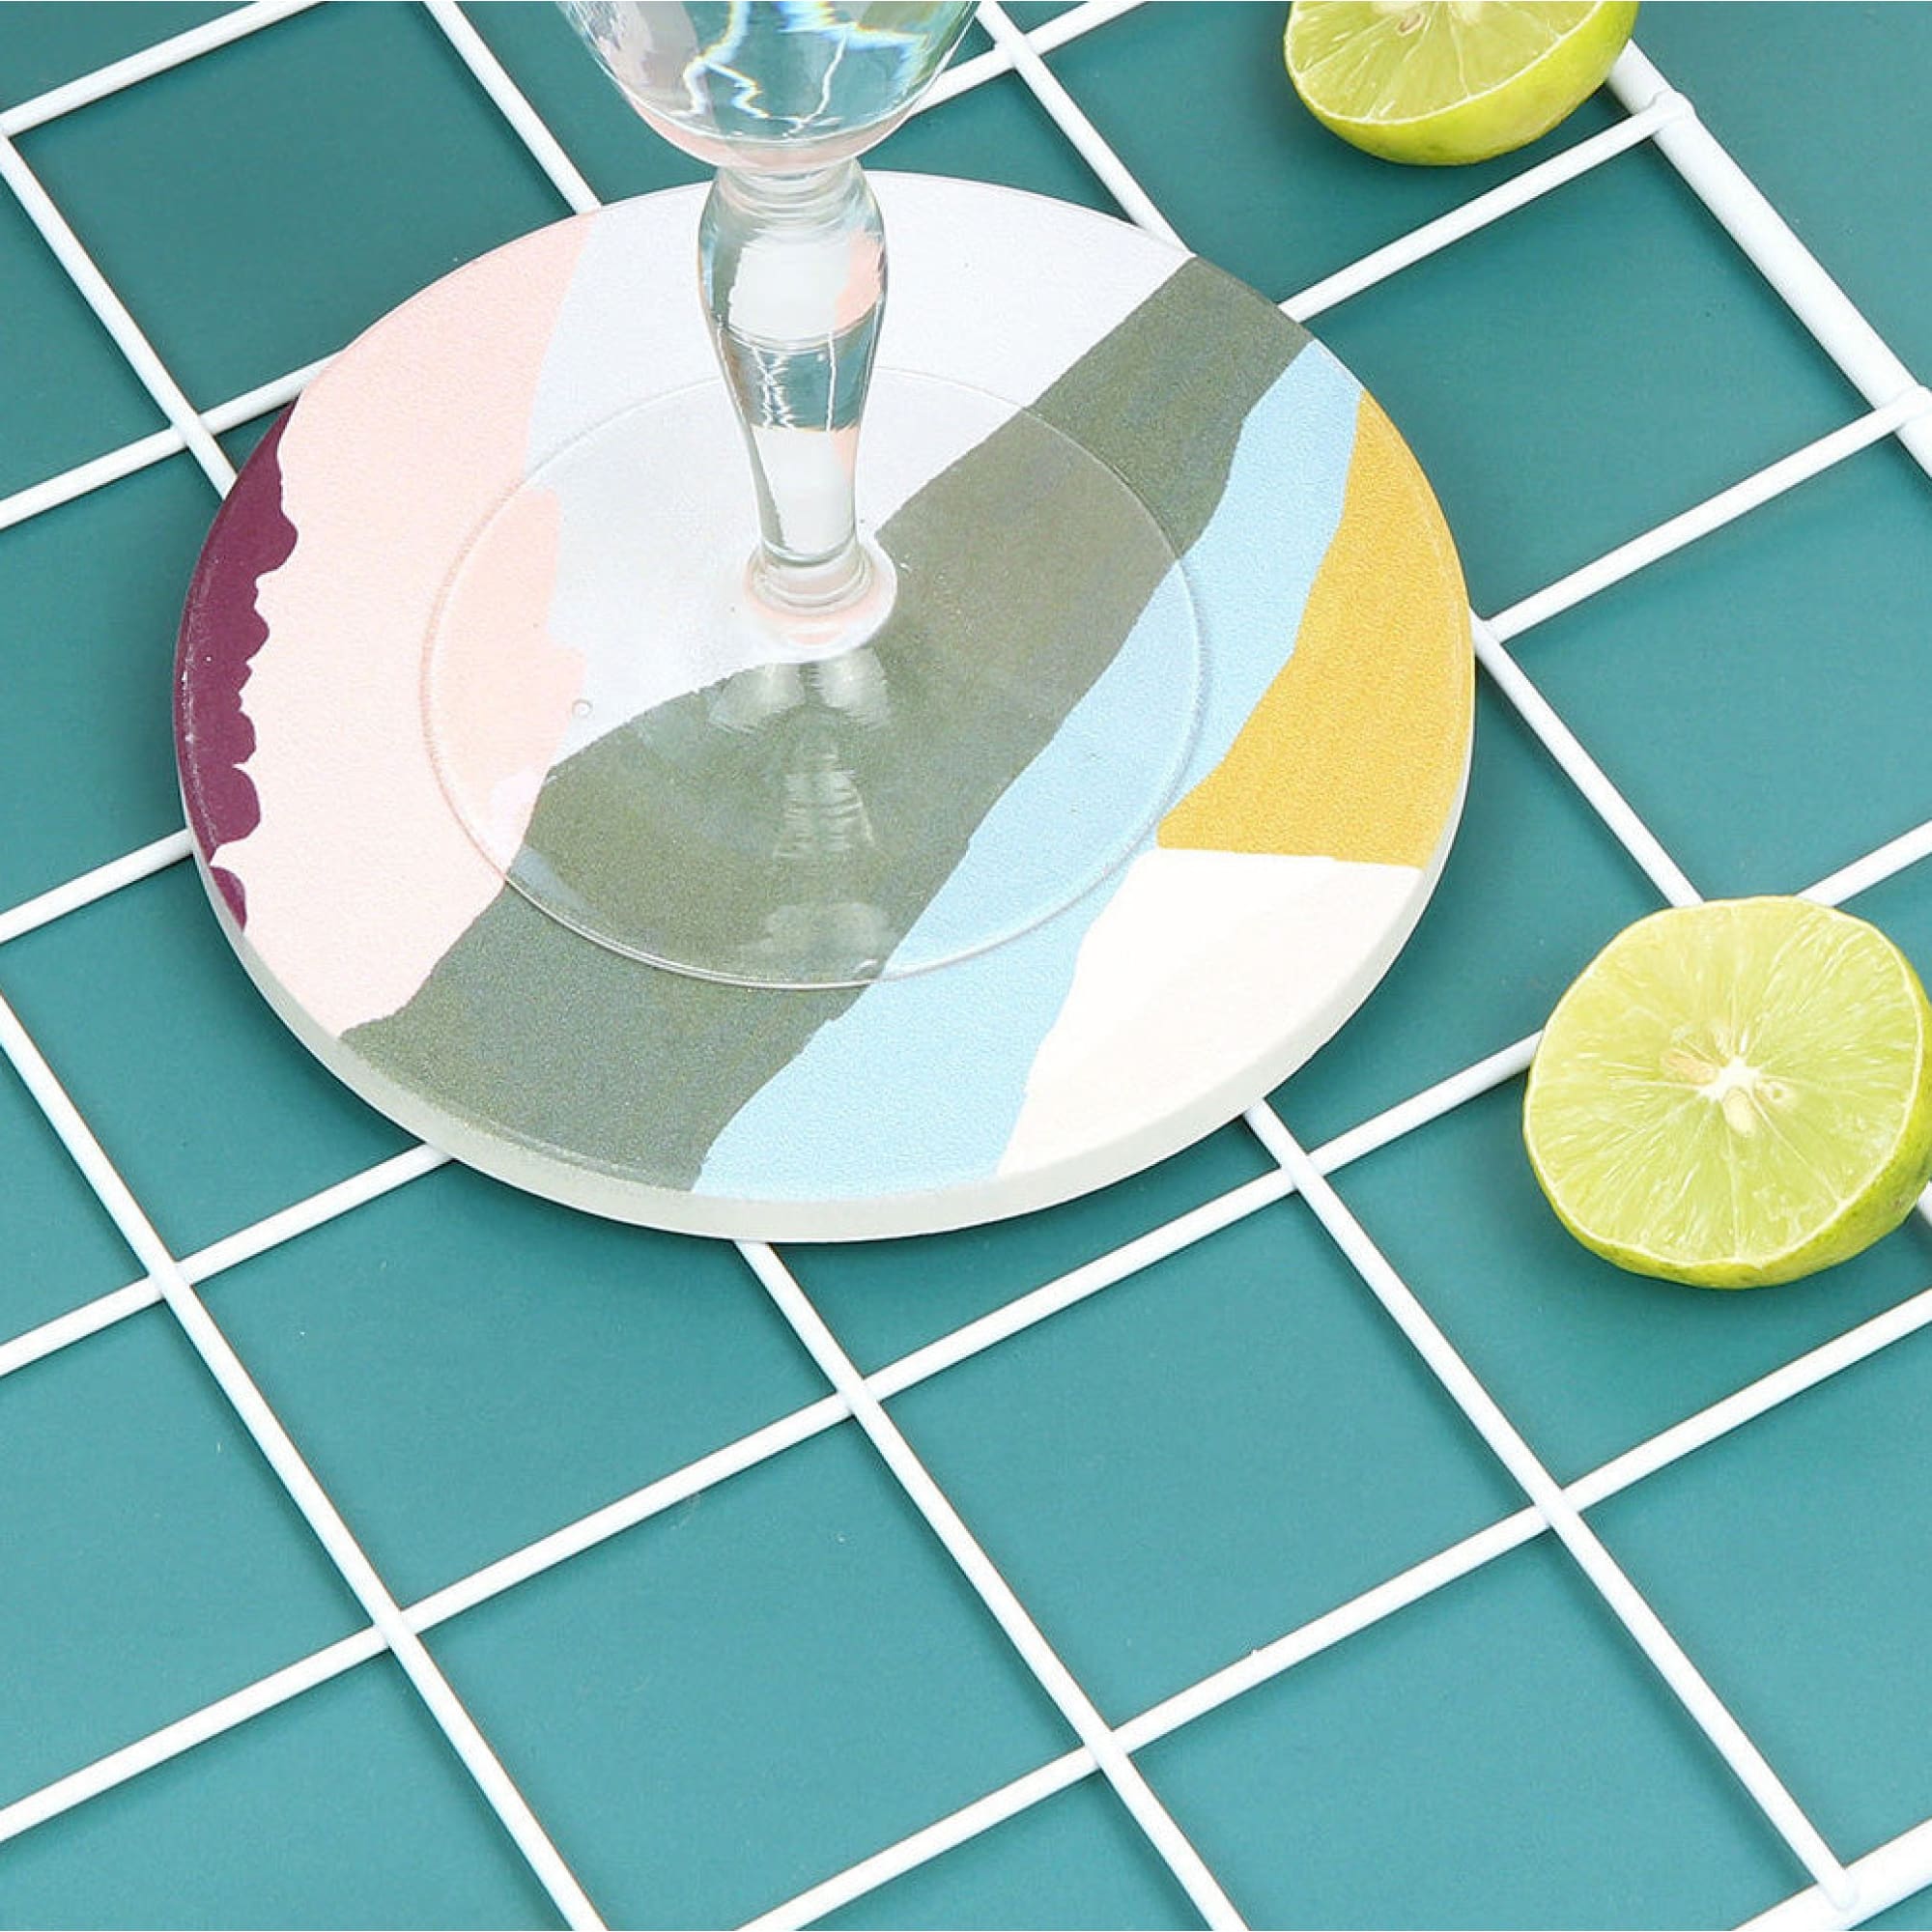 Absorbent Ceramic Coaster seen from above with a glass on it